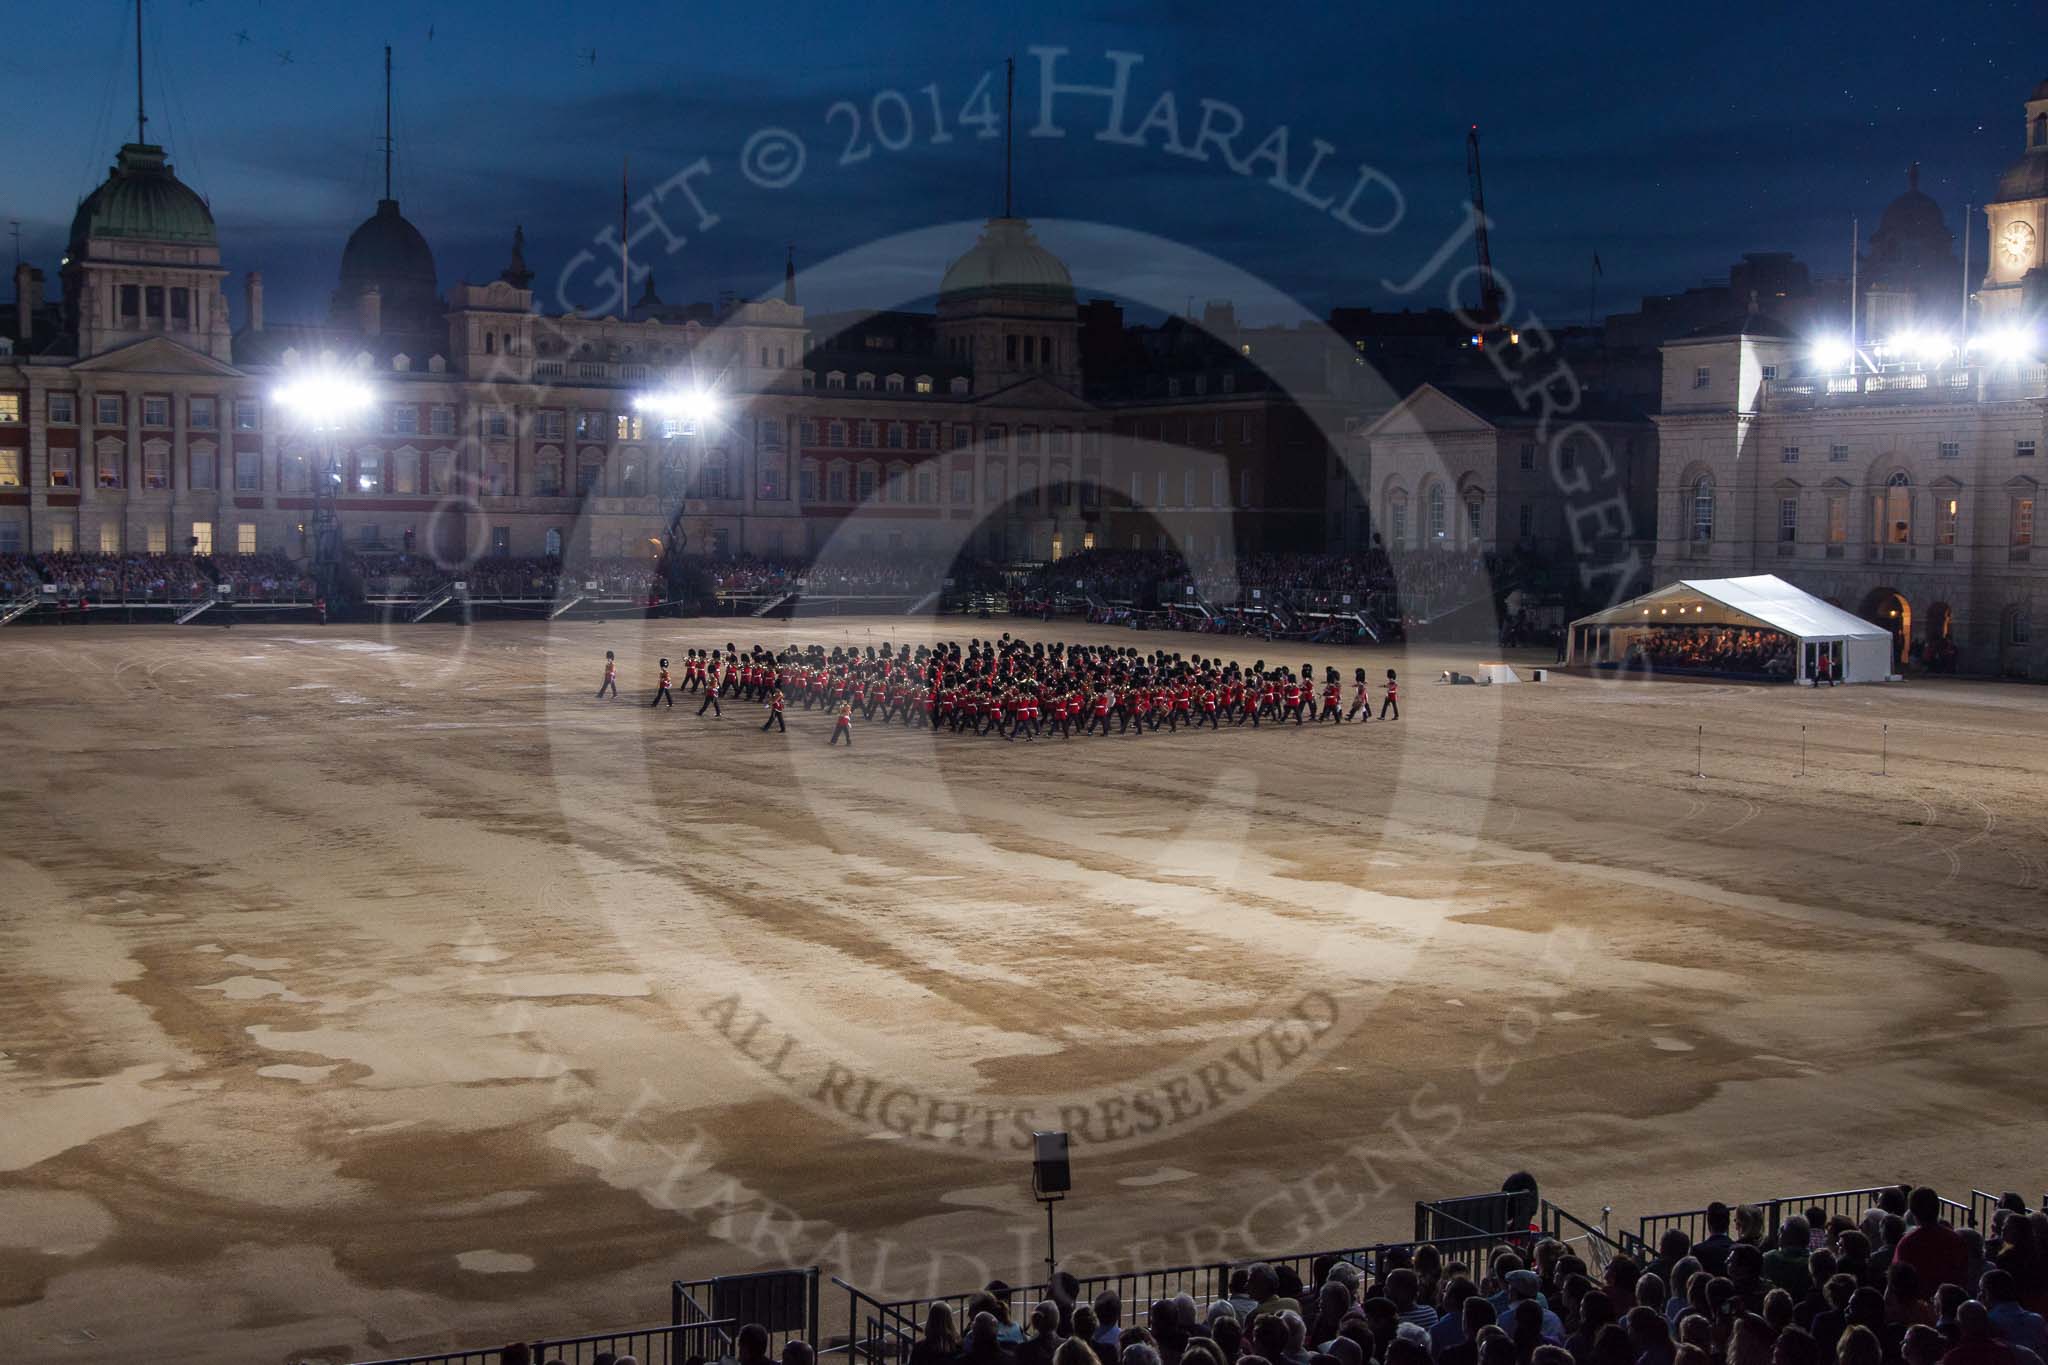 Beating Retreat 2014.
Horse Guards Parade, Westminster,
London SW1A,

United Kingdom,
on 11 June 2014 at 21:59, image #435